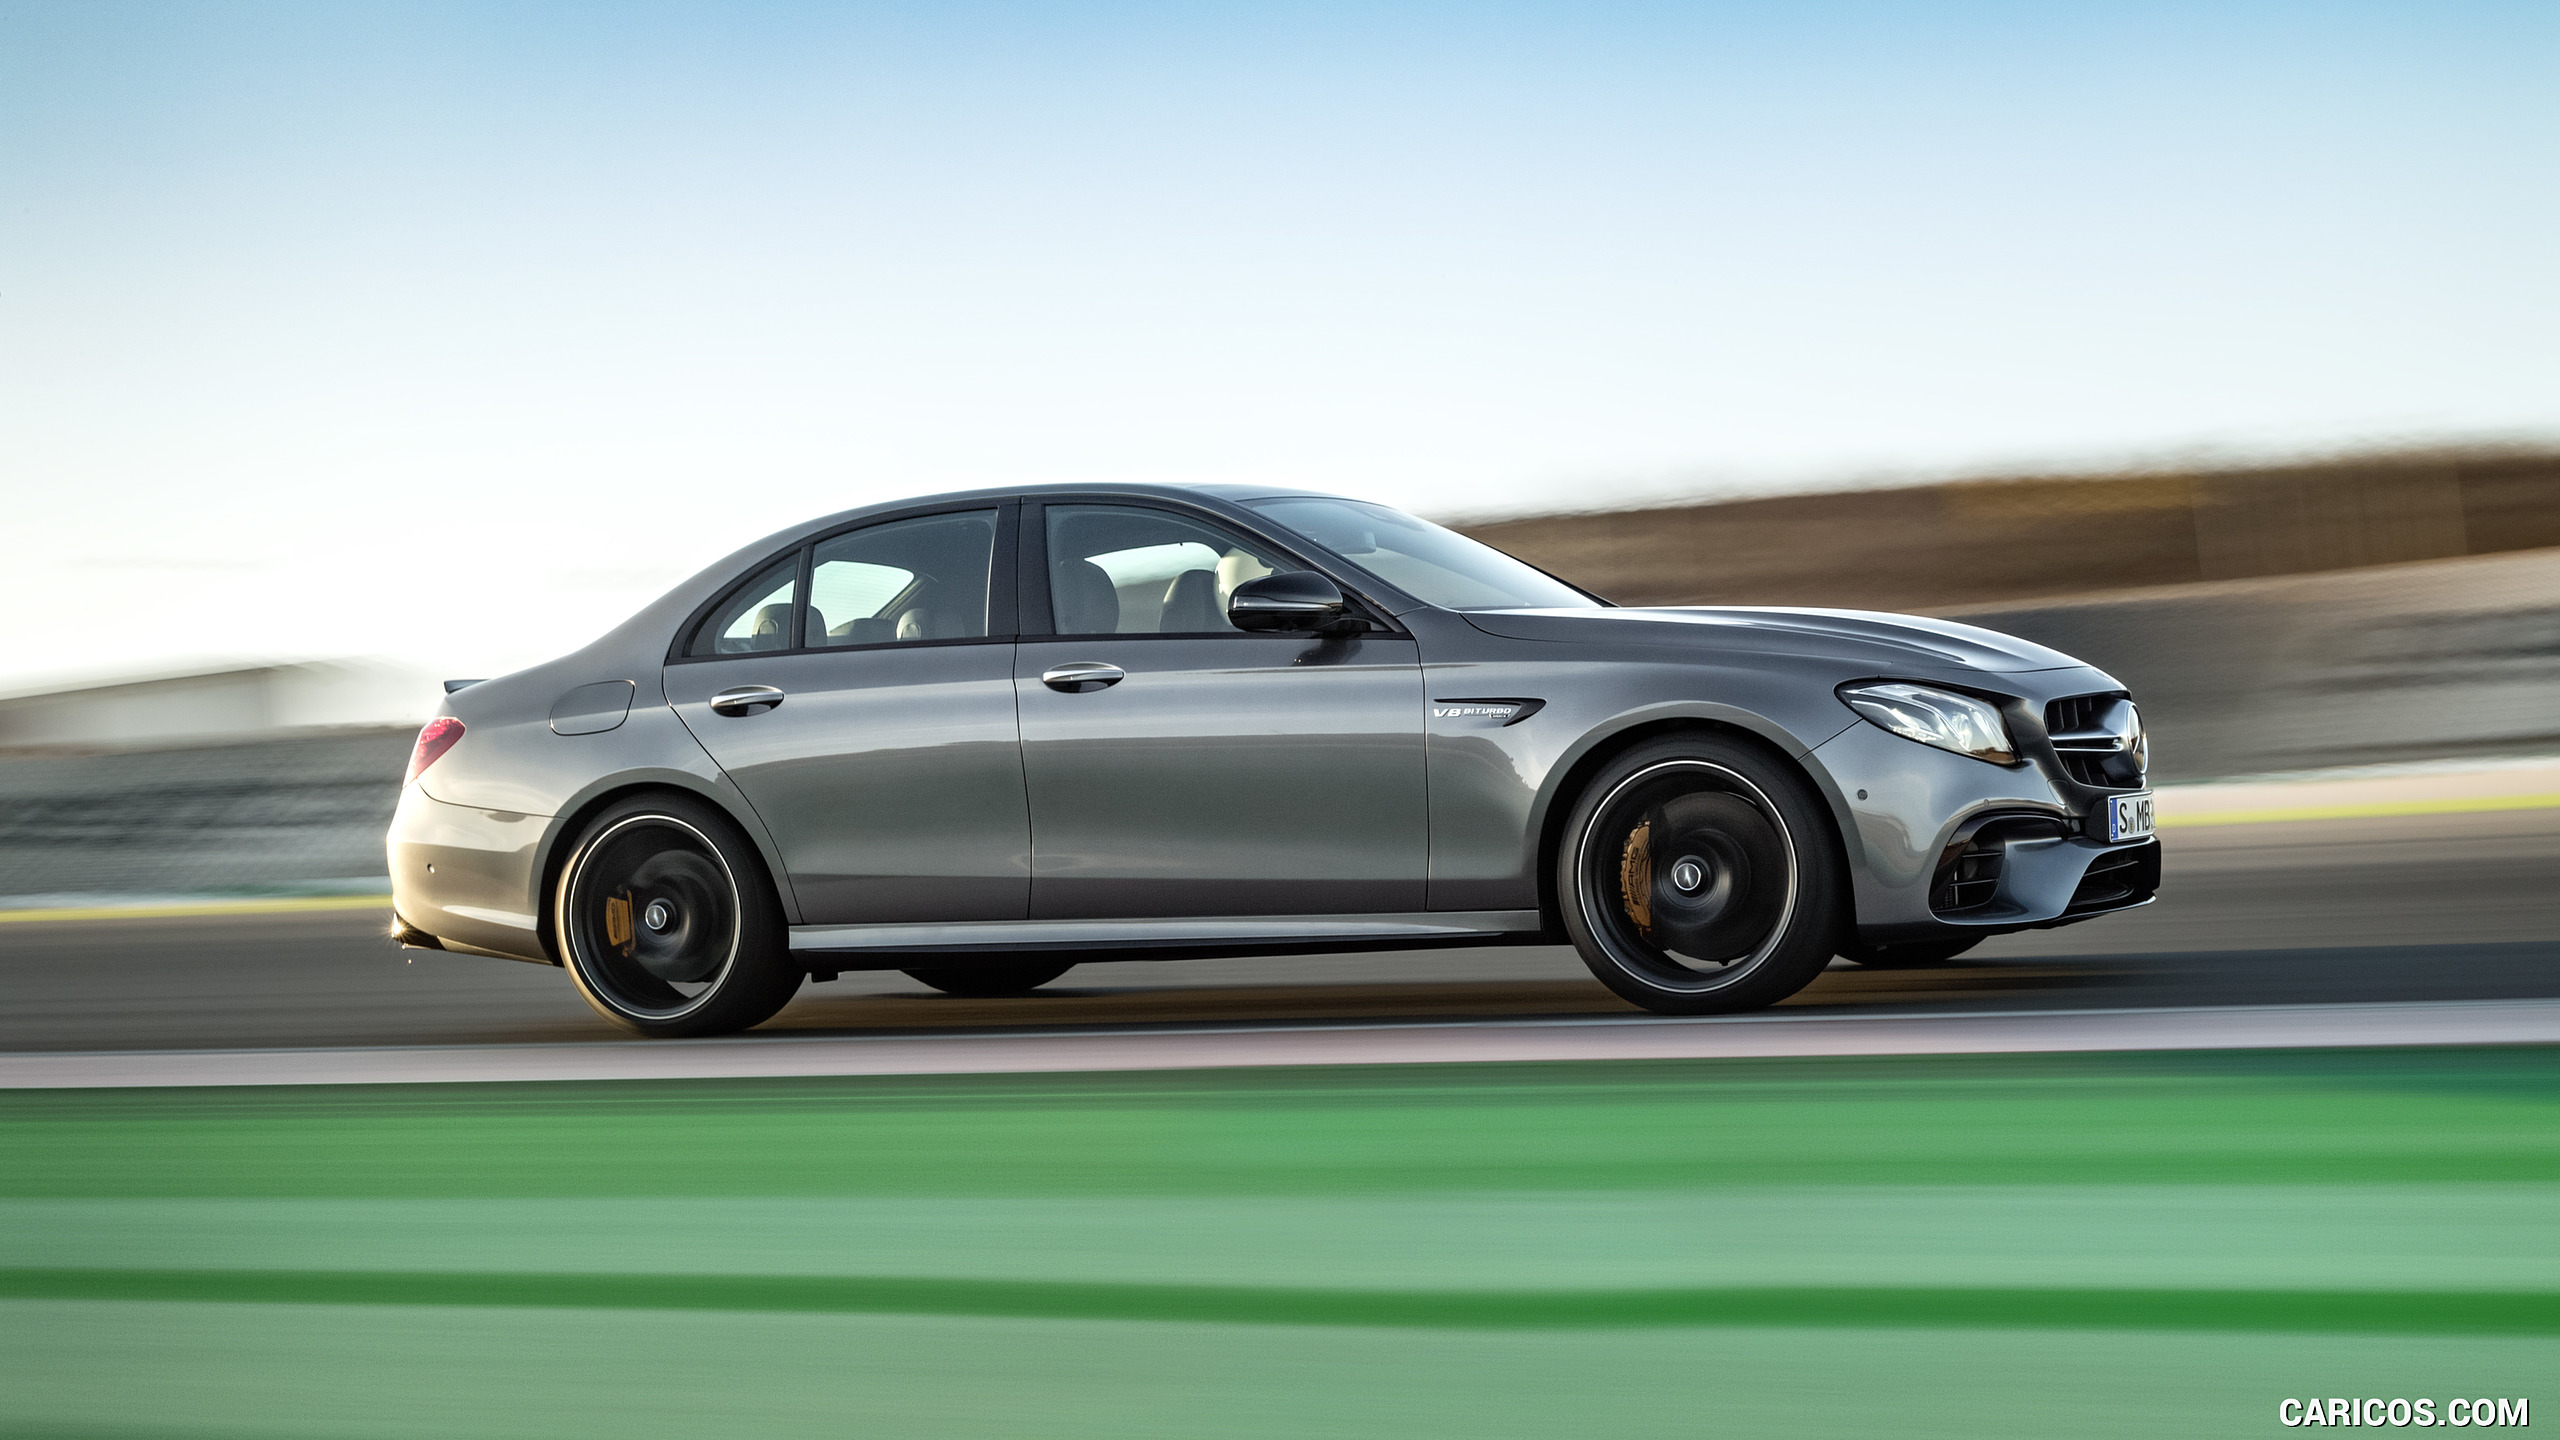 2018 Mercedes-AMG E63 S 4MATIC+ - Side, #15 of 323